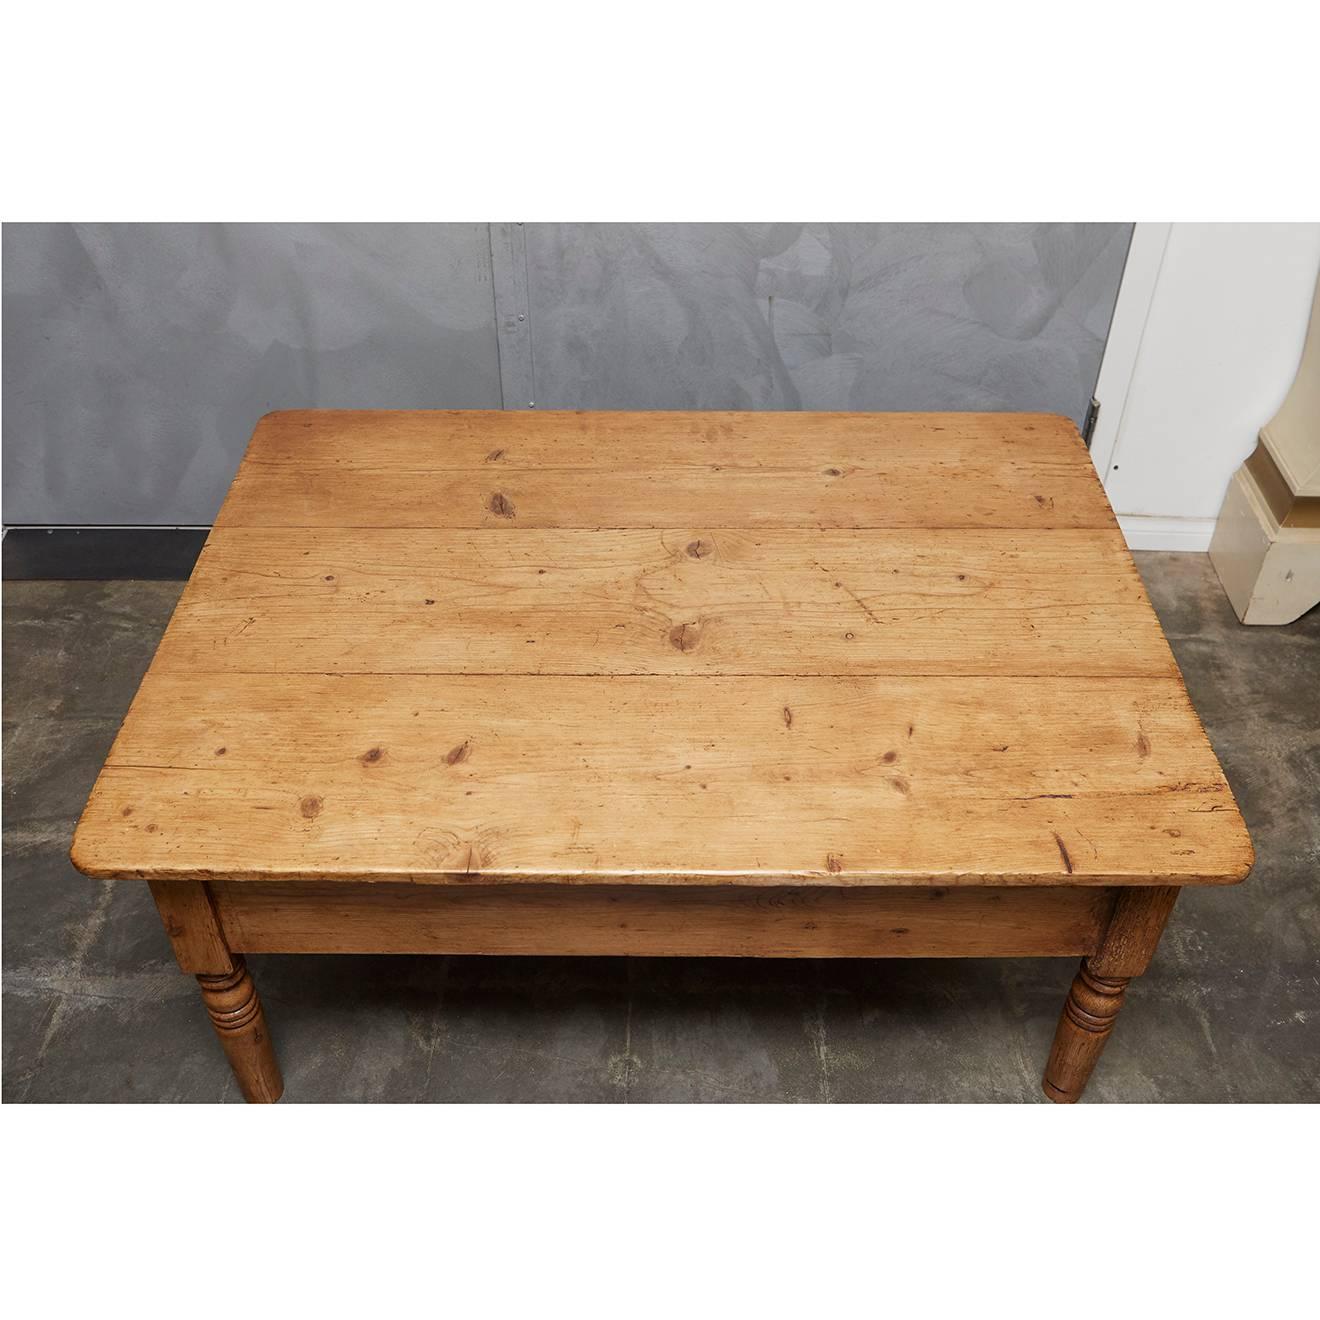 This English pine table was formerly a full height table and was converted to a coffee table over the years. It has one drawer with a large ceramic knob. The piece has a skirt and four turned legs. 







           